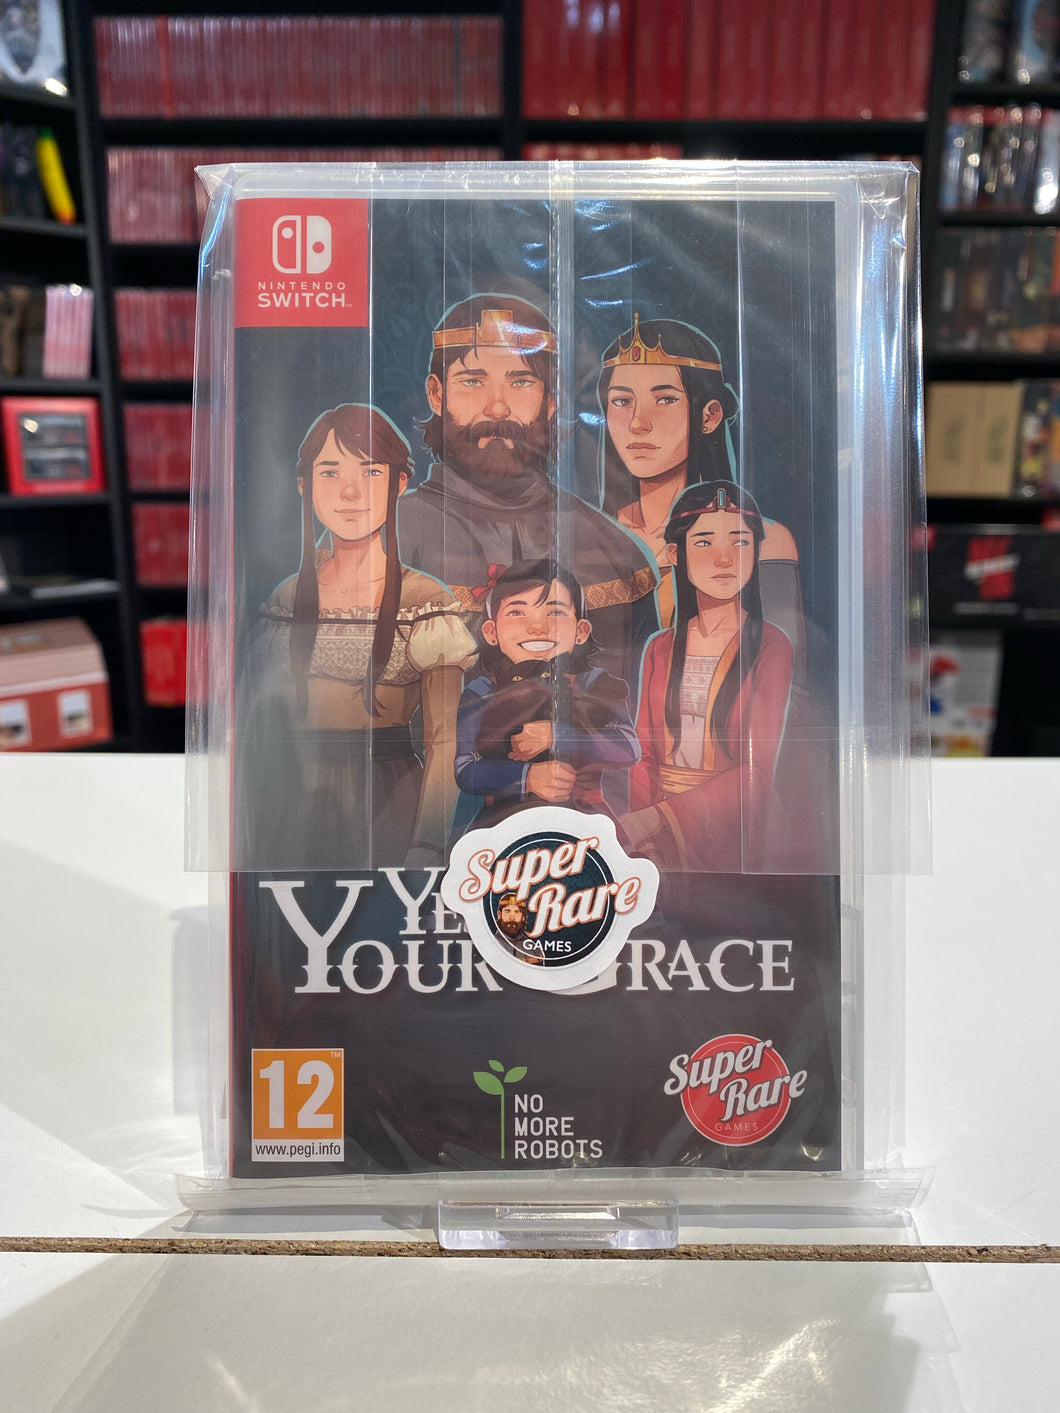 Yes, your grace / Super rare games / Switch / 4000 copies